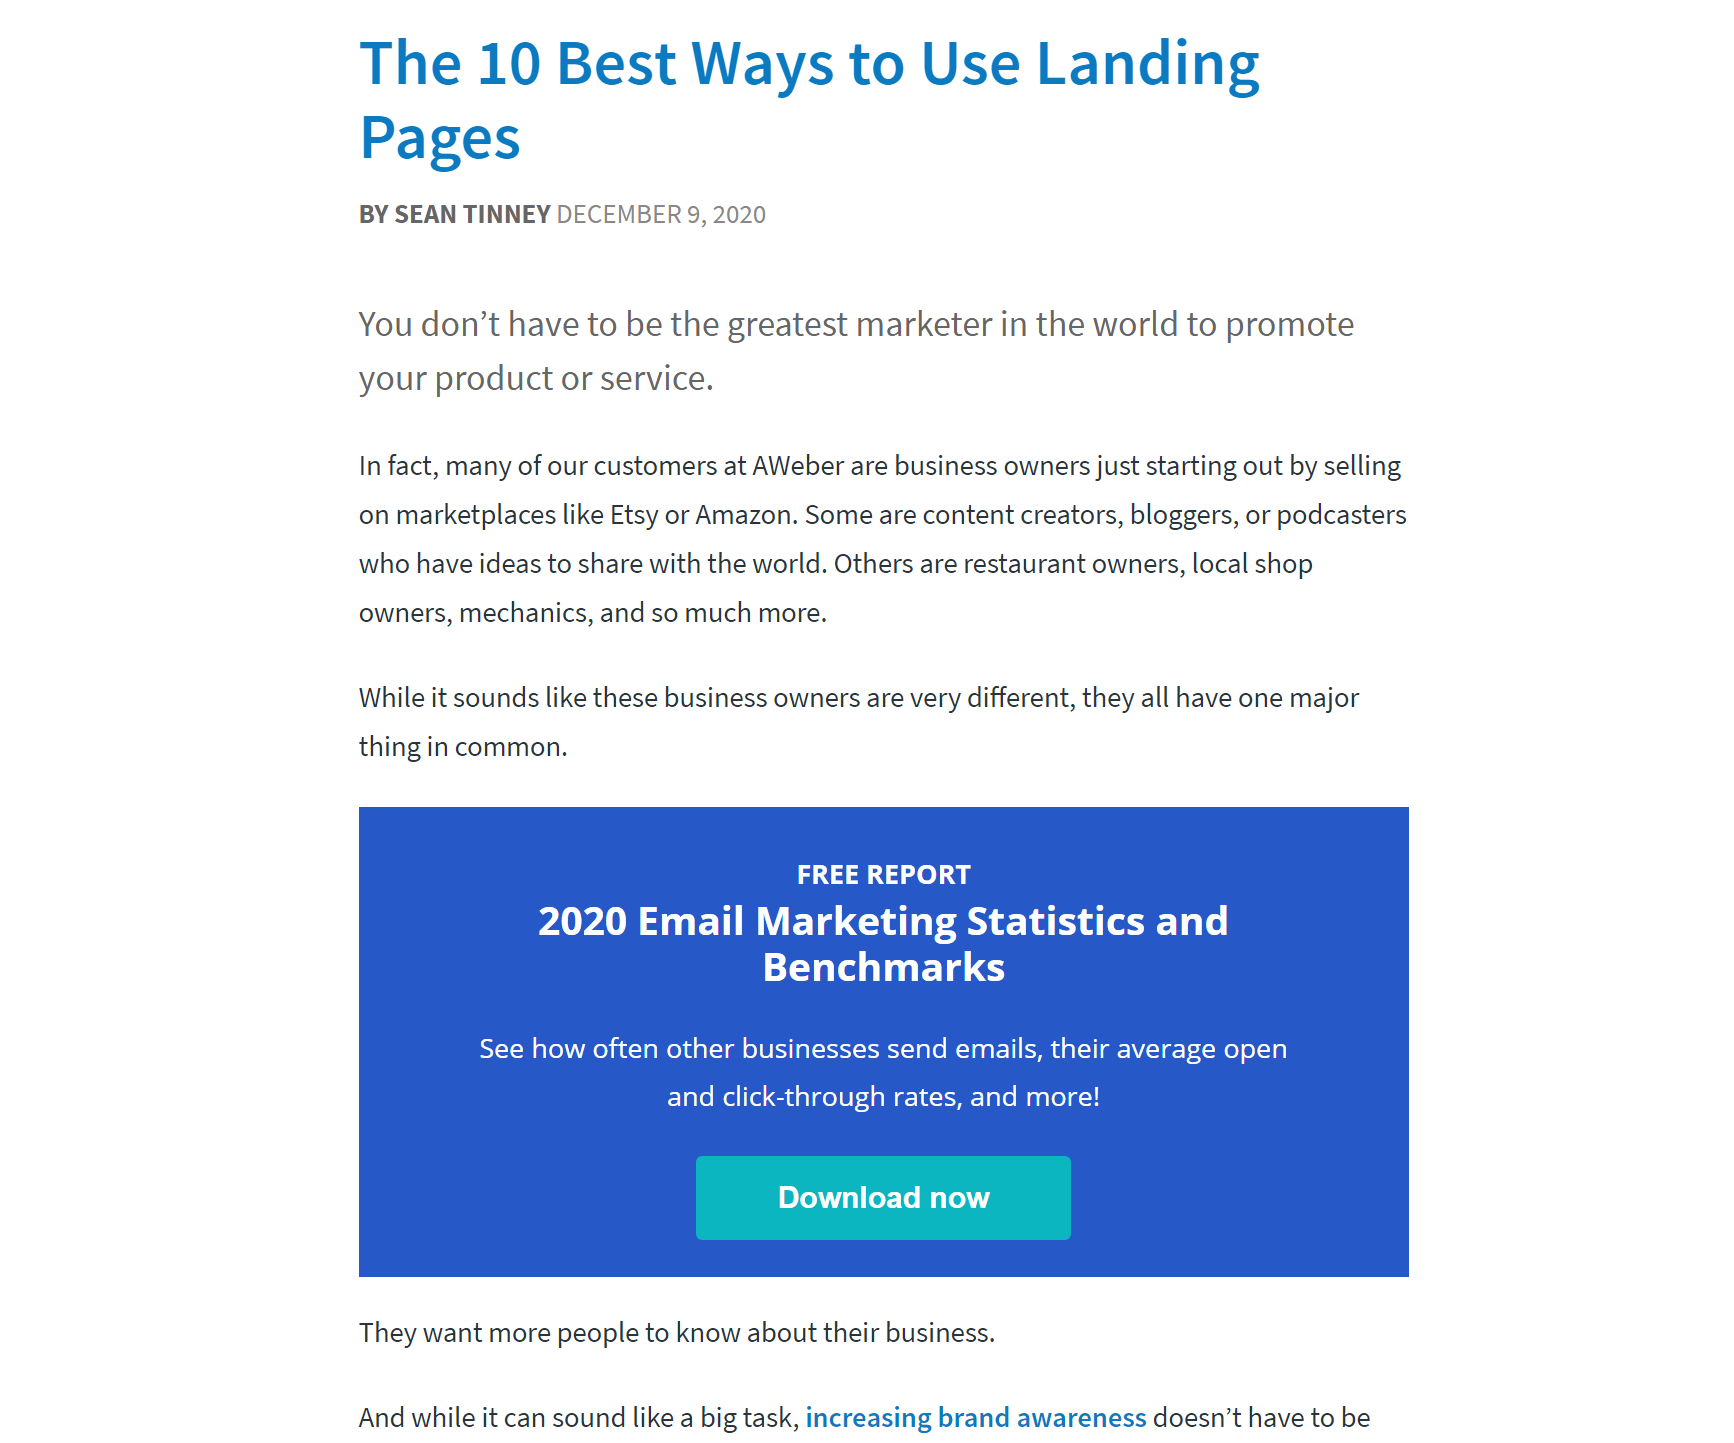 The 10 Best Ways to Use Landing Pages by Sean Tinney